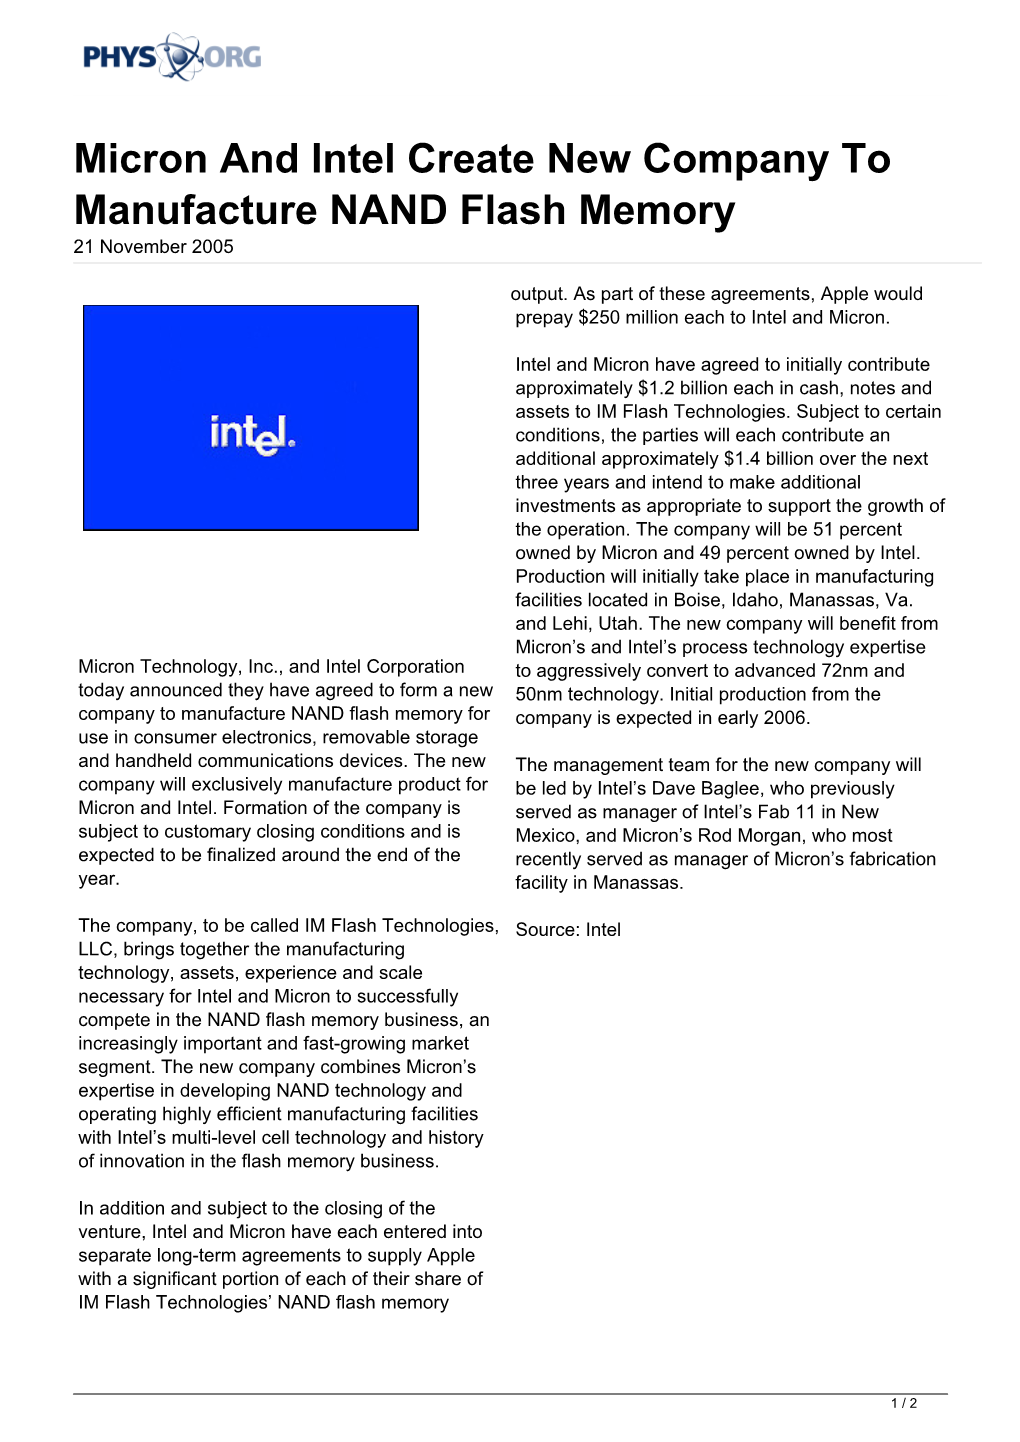 Micron and Intel Create New Company to Manufacture NAND Flash Memory 21 November 2005